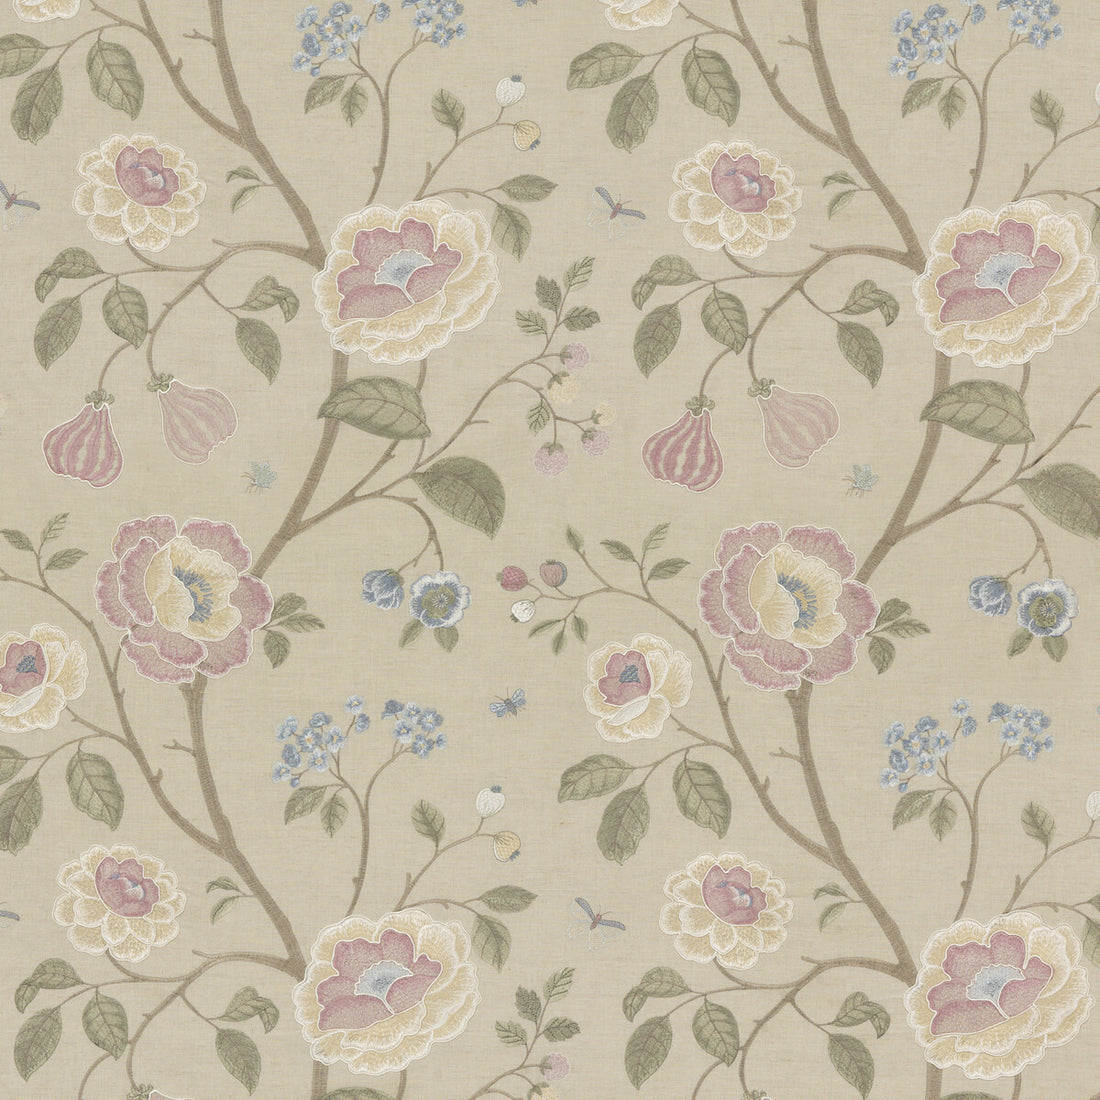 Lillington fabric in blush color - pattern BF10763.1.0 - by G P &amp; J Baker in the Keswick Embroideries collection